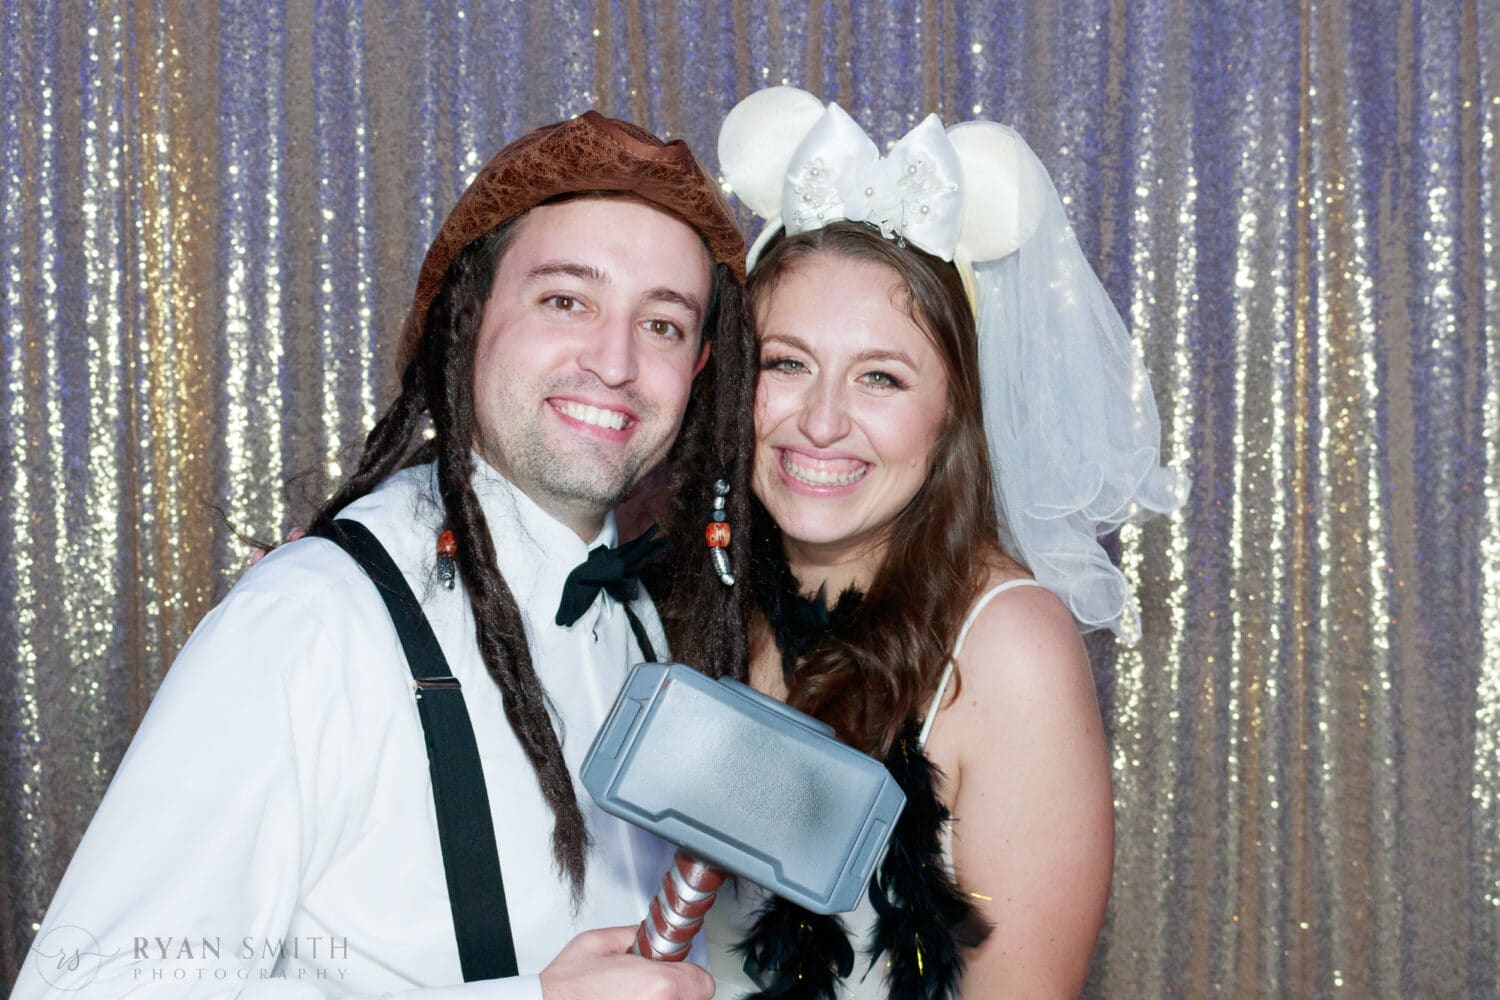 Fun photo booth pictures with the gold background - The Venue at White Oaks Farm